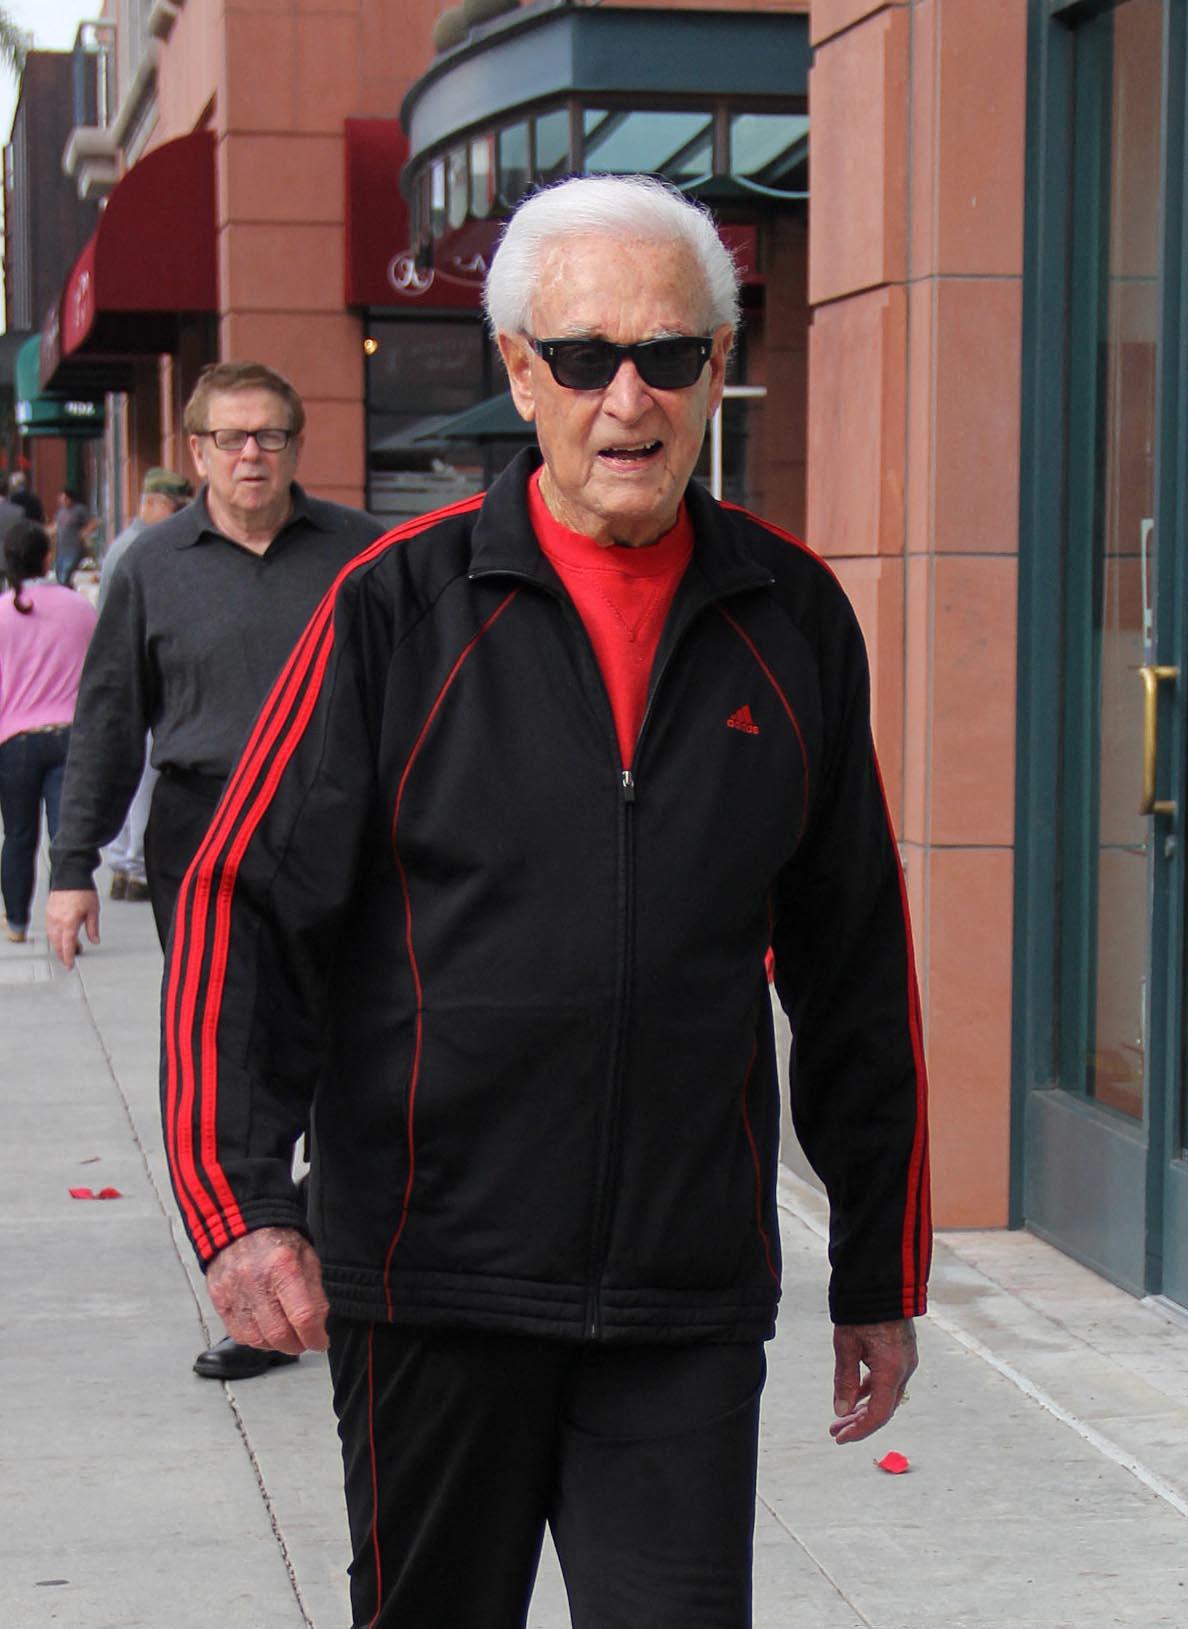 Fans React To THIS Resurfaced Skit Of Bob Barker Showcasing His Humor Amid News Of His Death 